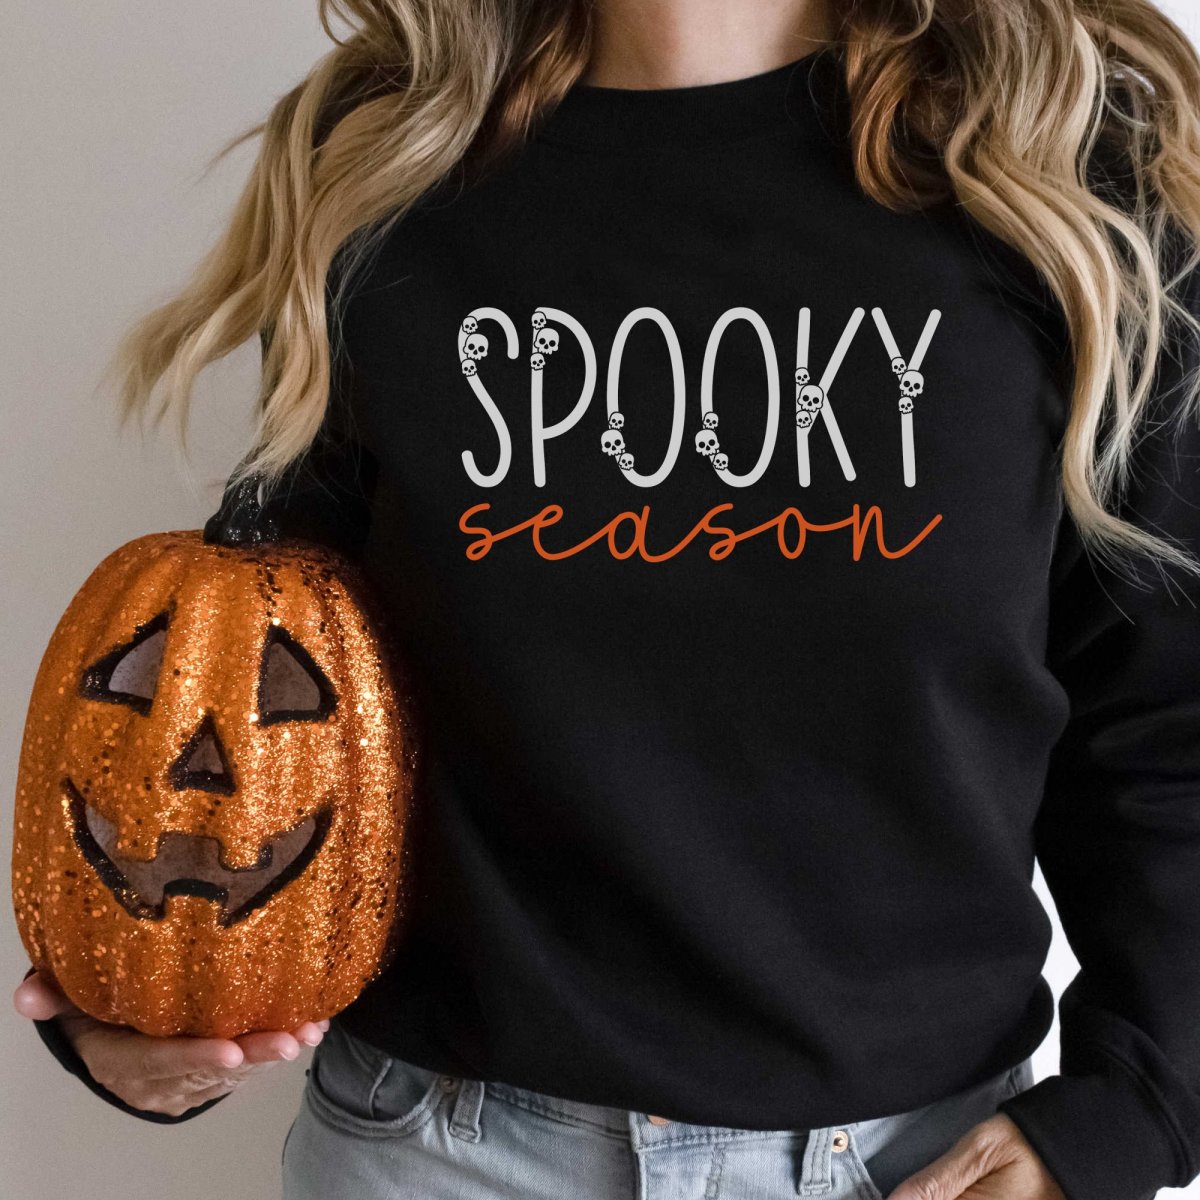 Get ready for spooky season with this minimalist free Halloween SVG file! Make tons of Halloween projects including minimalist sweatshirts with your Cricut or Silhouette machine! Use this cute cut file with spooky skulls for t-shirts, wood signs, paper crafting, planner stickers, Halloween decorations, and so much more! 